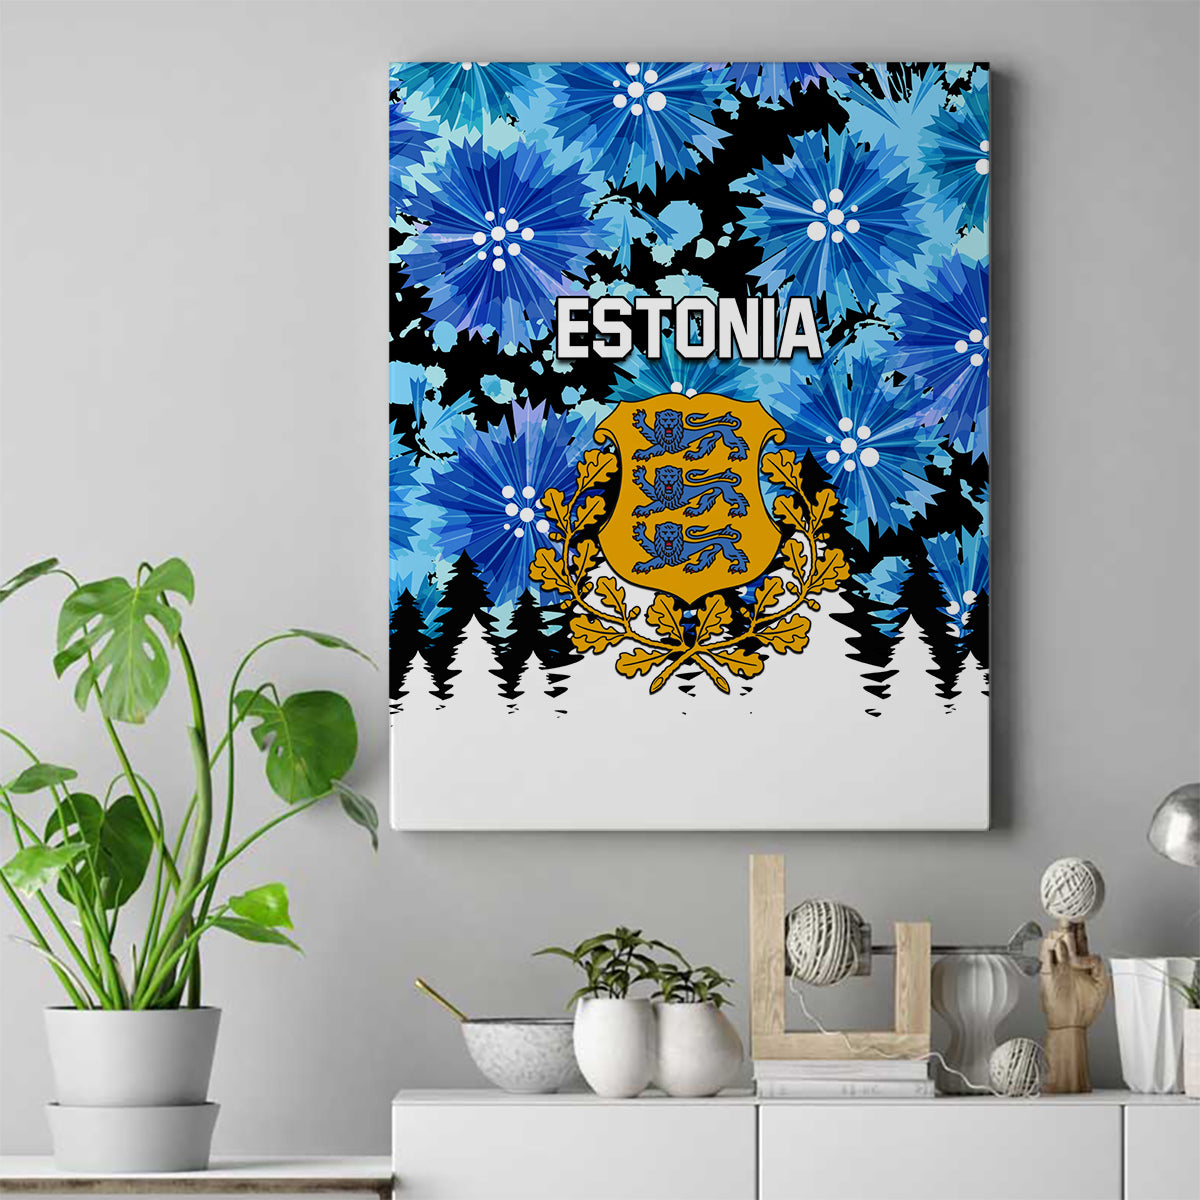 Estonia Independence Day Canvas Wall Art Cornflower Unique Style